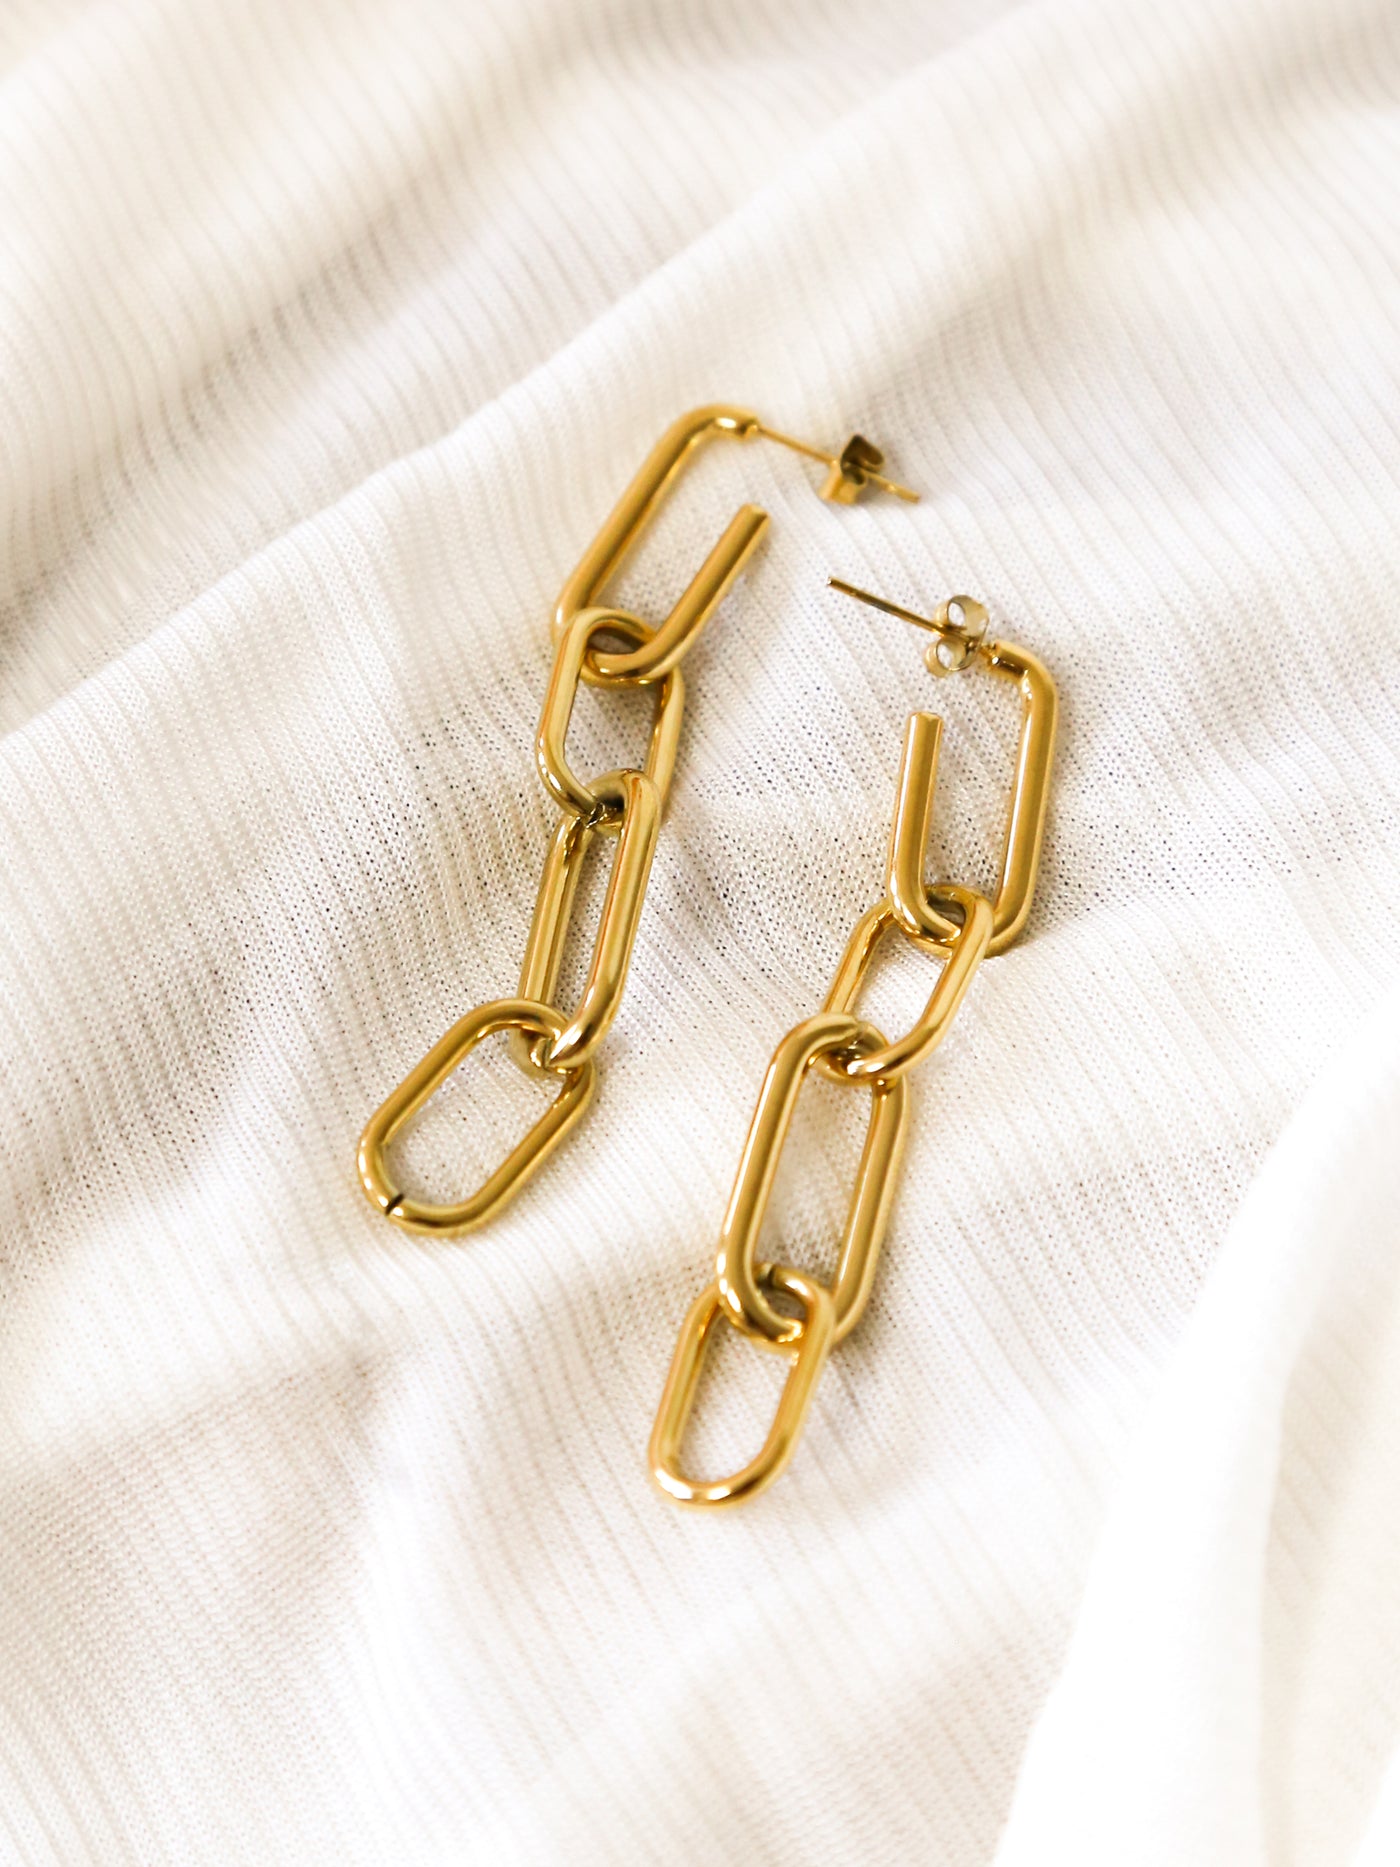 A pair of gold paperclip link earrings.